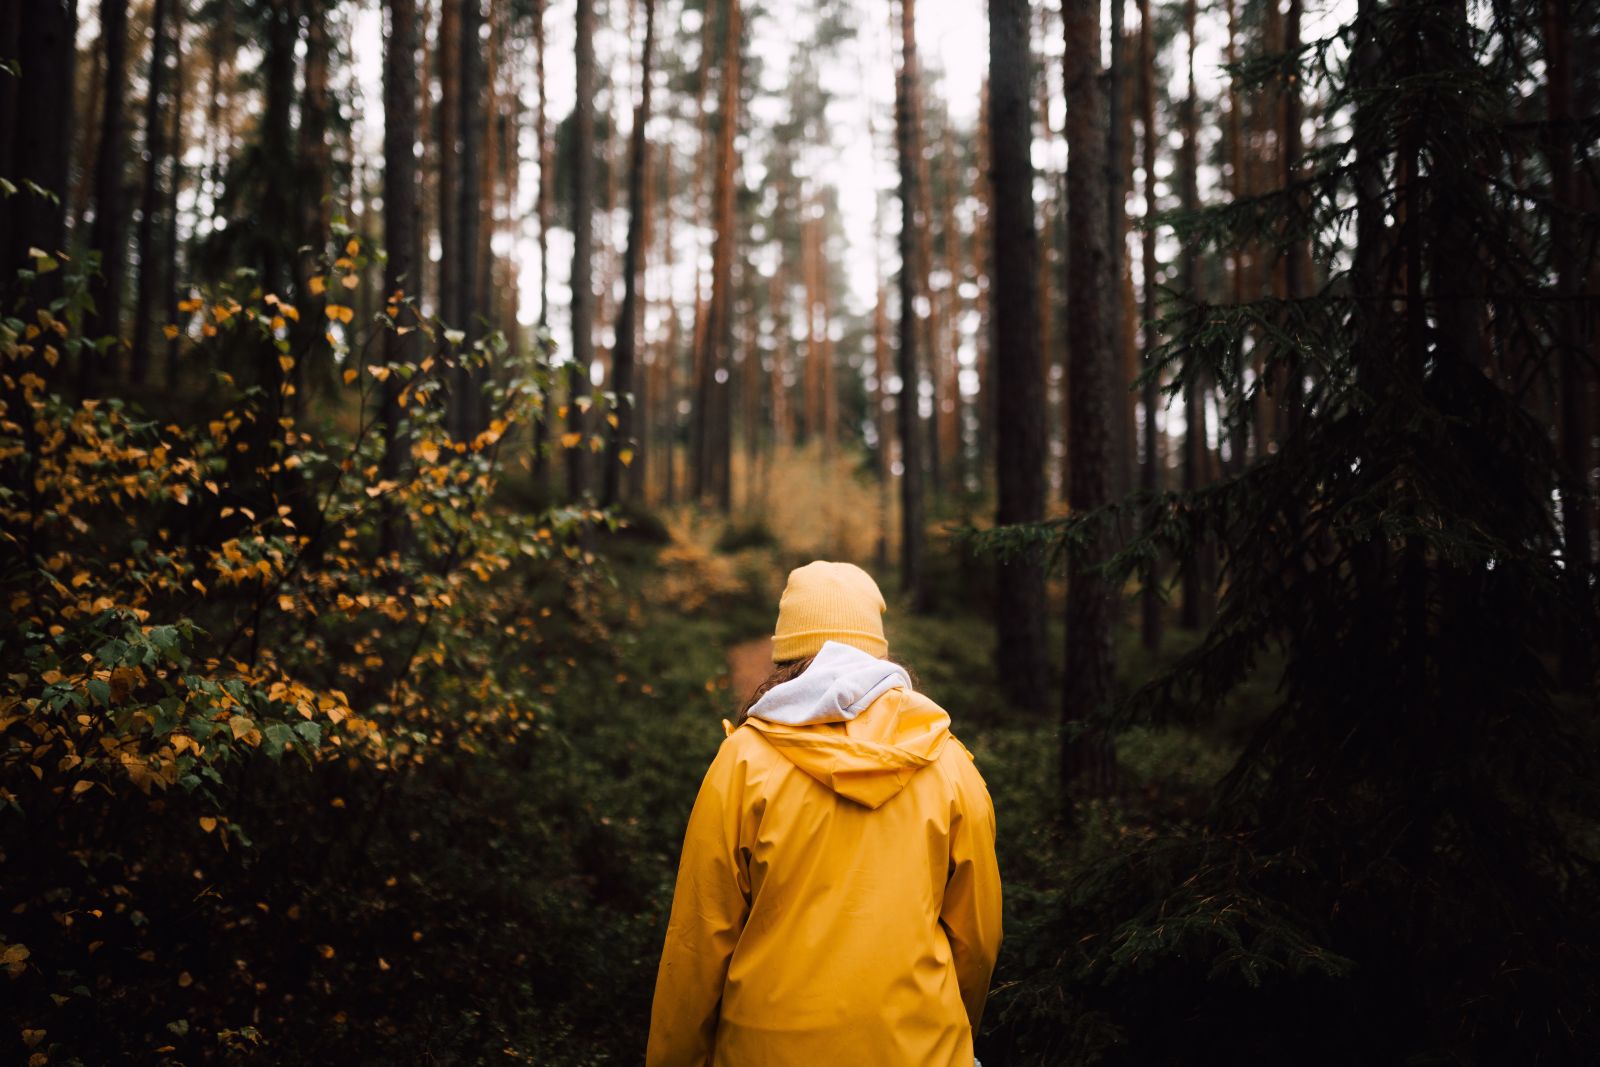 Woman in forest wearing a yellow beanie and yellow rain jacket